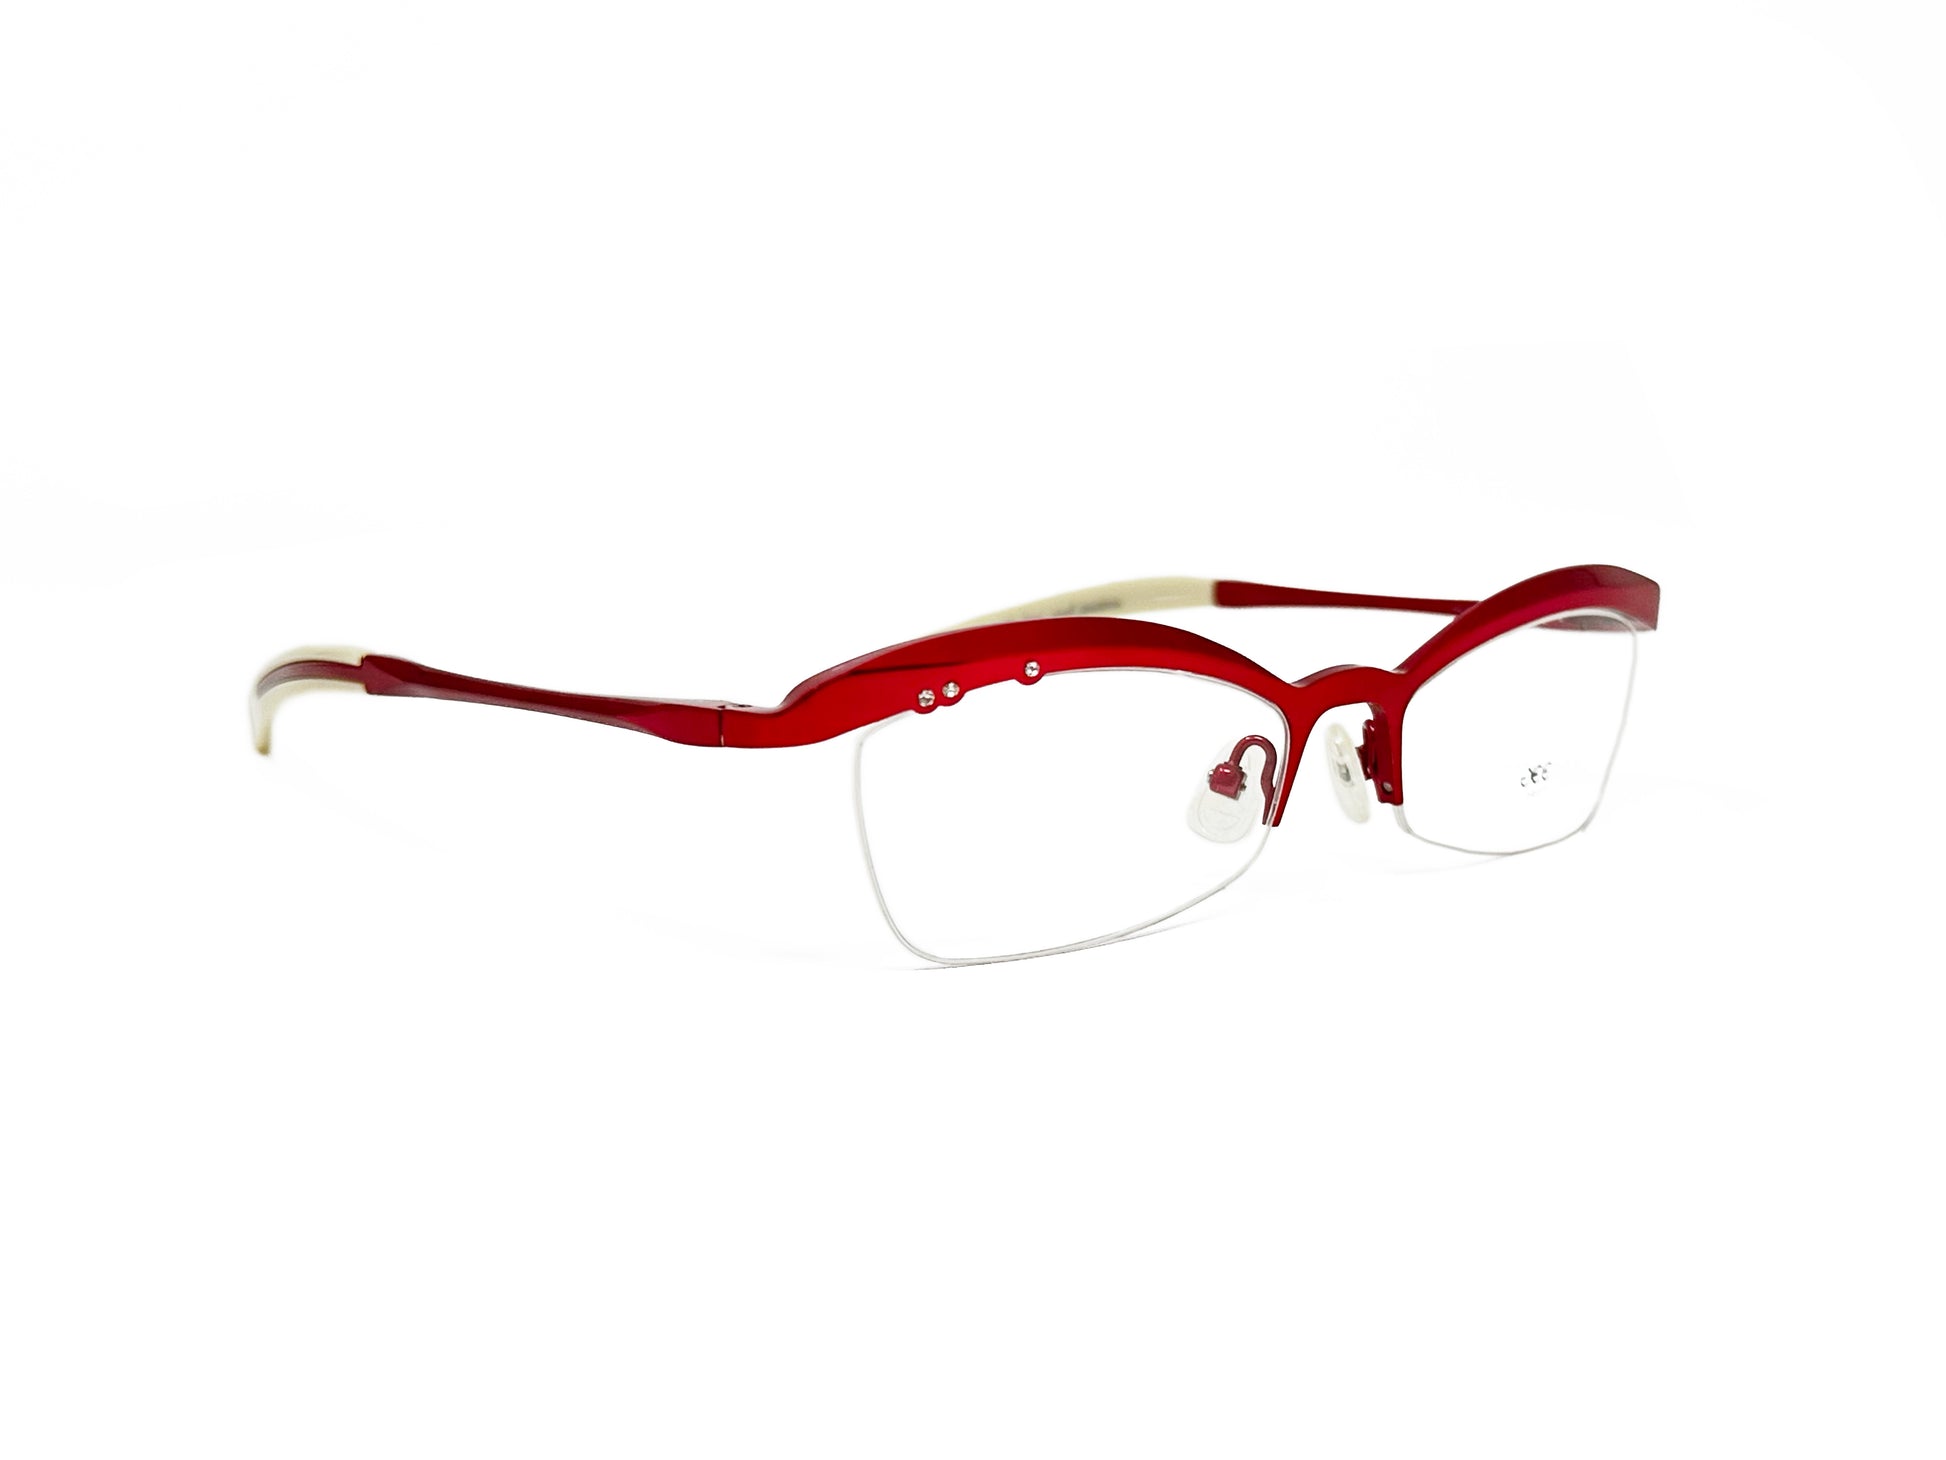 Gee Vice half-rim, rectangular with slight cat-eye, metal optical frame. Model: Angel Kiss. Color: Red. Side view.